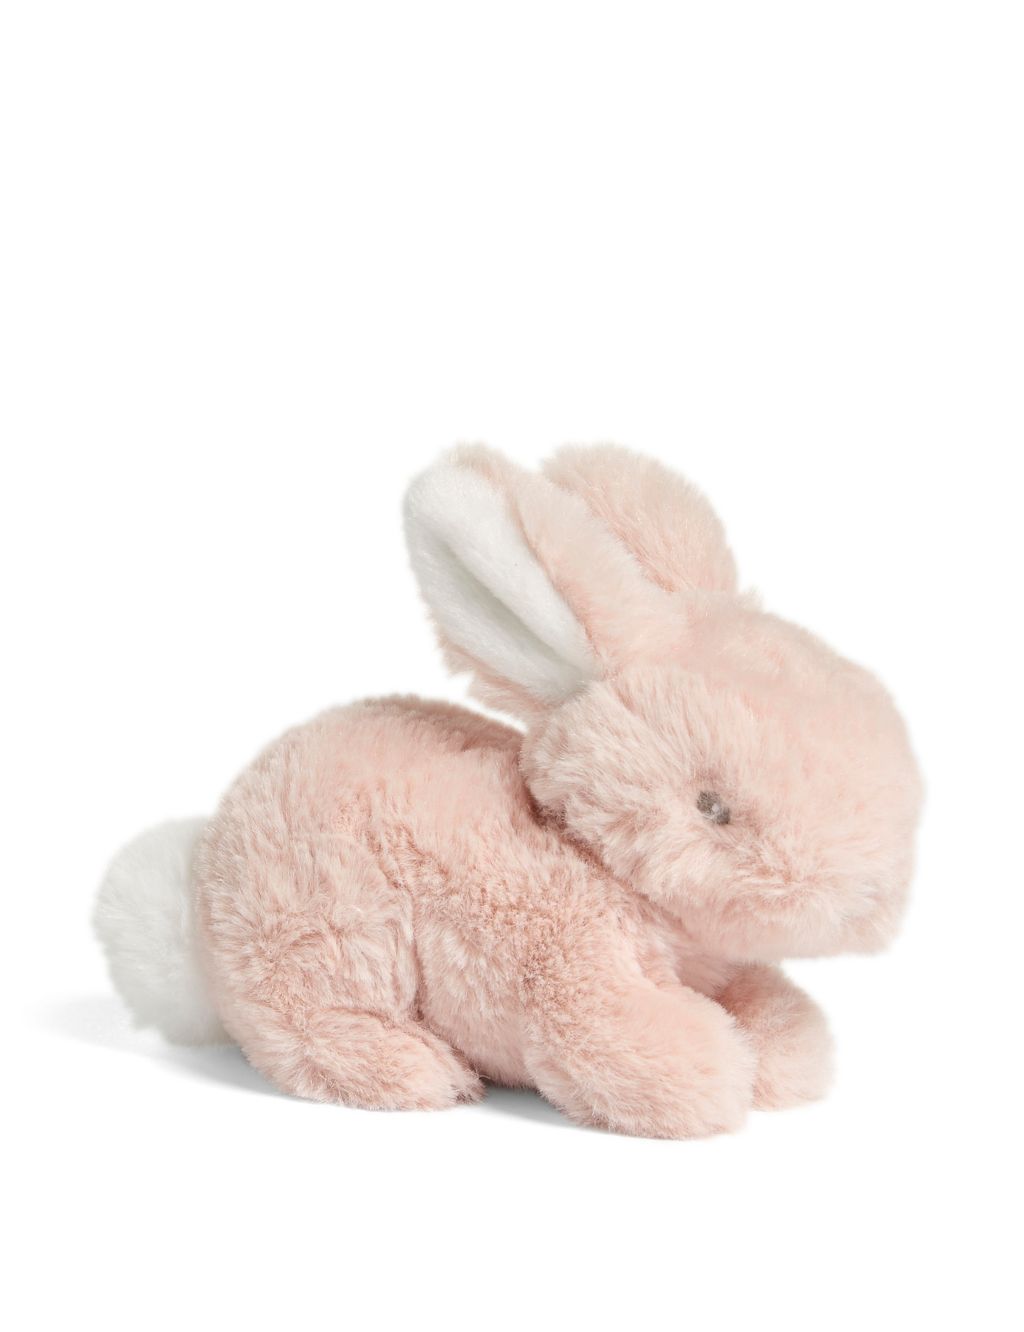 Forever Treasured Pink Bunny Soft Toy